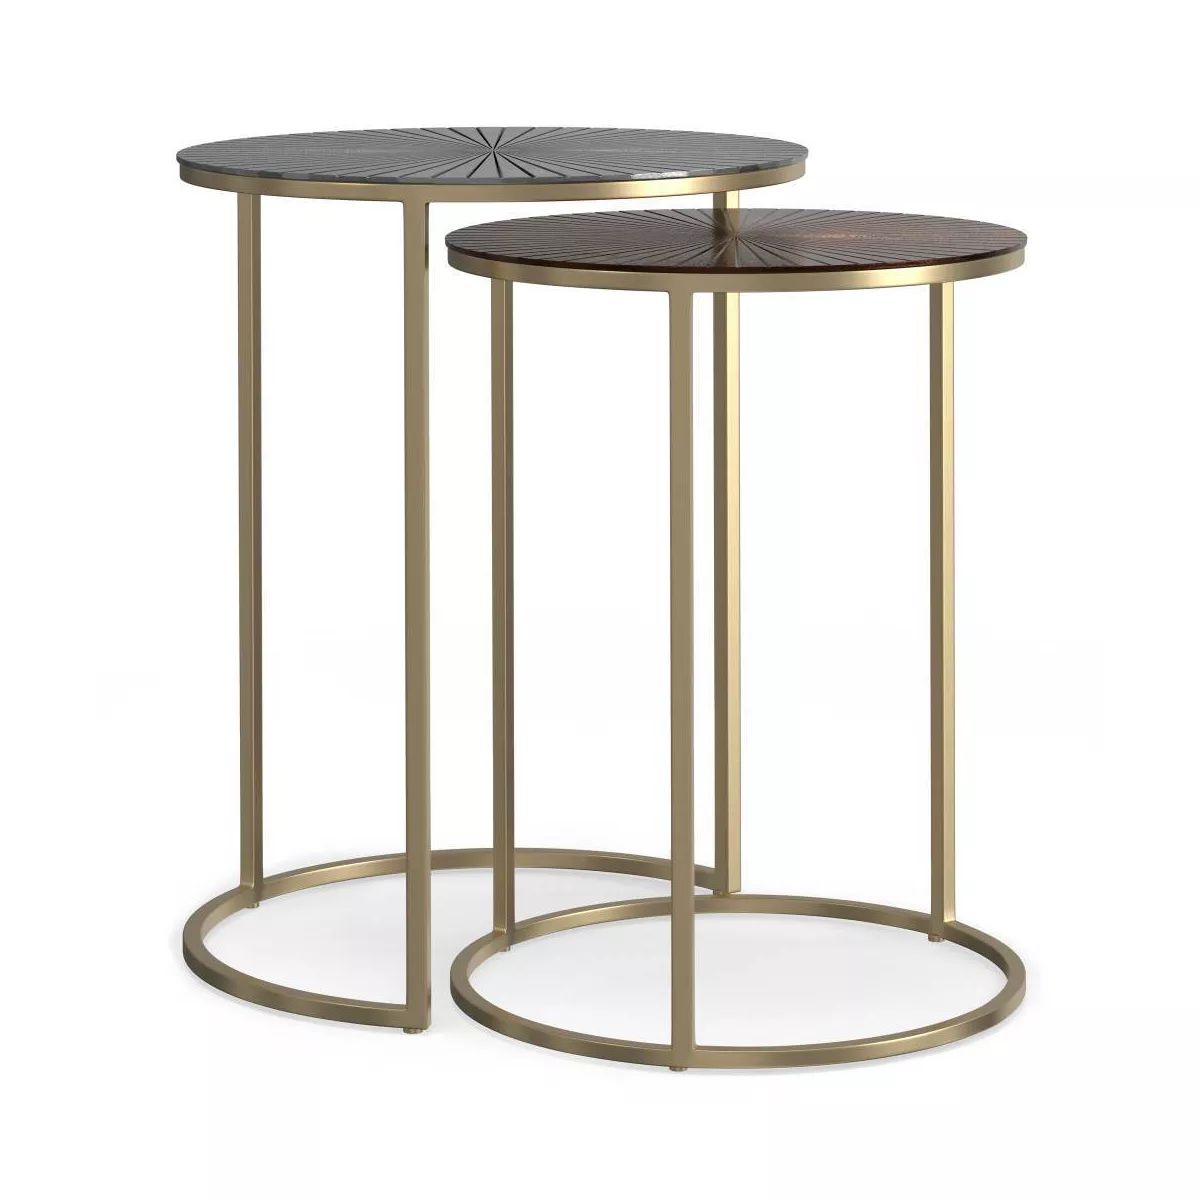 2pc Oakdale Nesting Tables Antique Nickel/Antique Copp - WyndenHall | Target